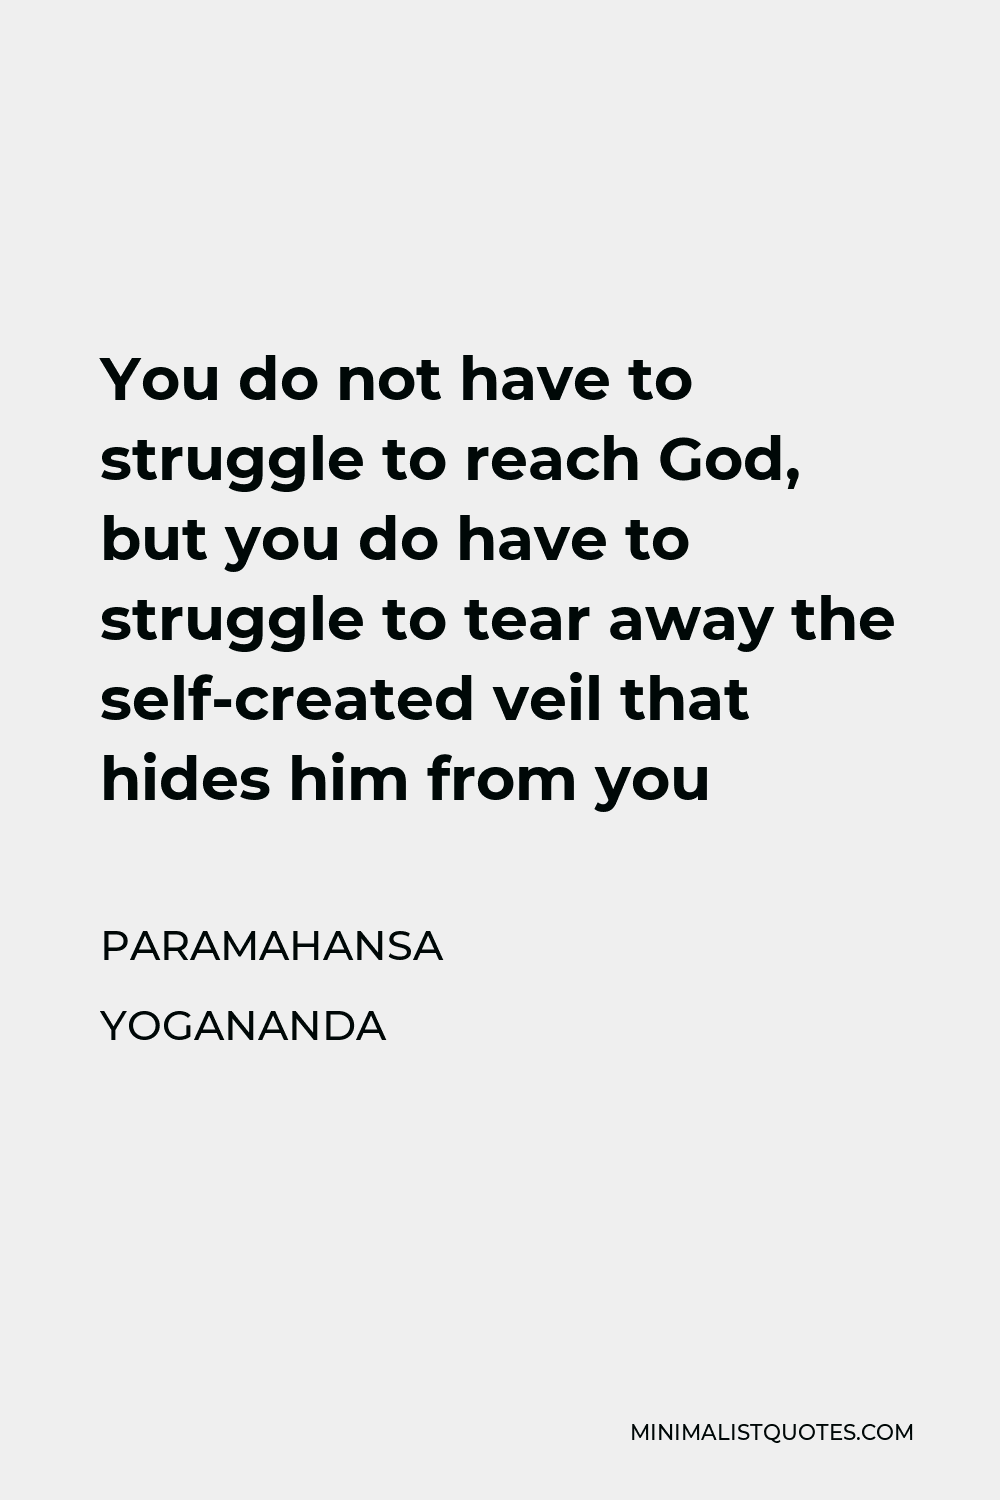 Paramahansa Yogananda Quote - You do not have to struggle to reach God, but you do have to struggle to tear away the self-created veil that hides him from you